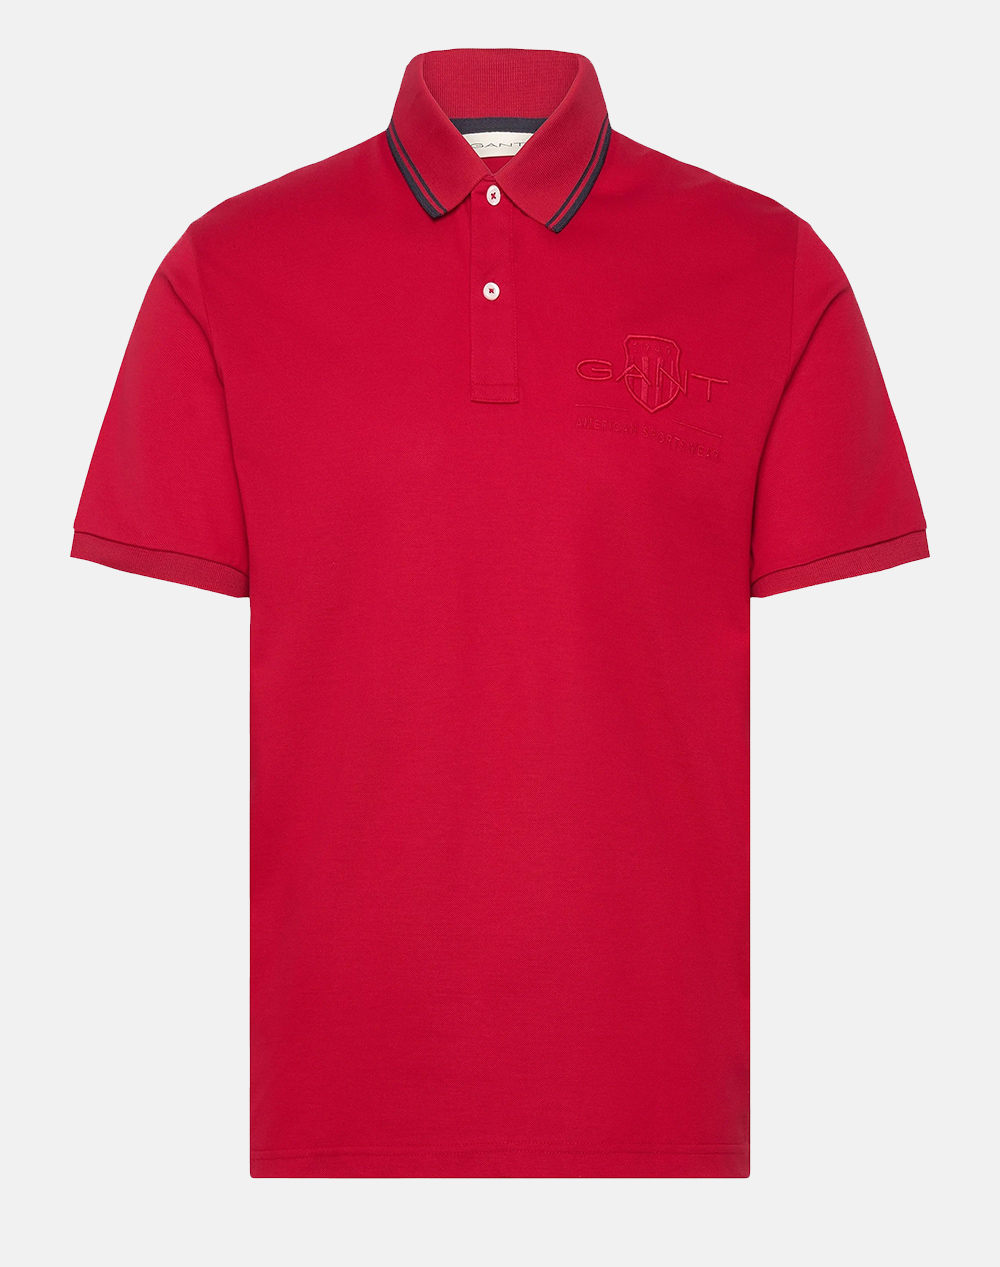 GANT ΜΠΛΟΥΖΑ ΚΜ CONTRAST TIPPING SS PIQUE POLO 3G2013039-630 Red